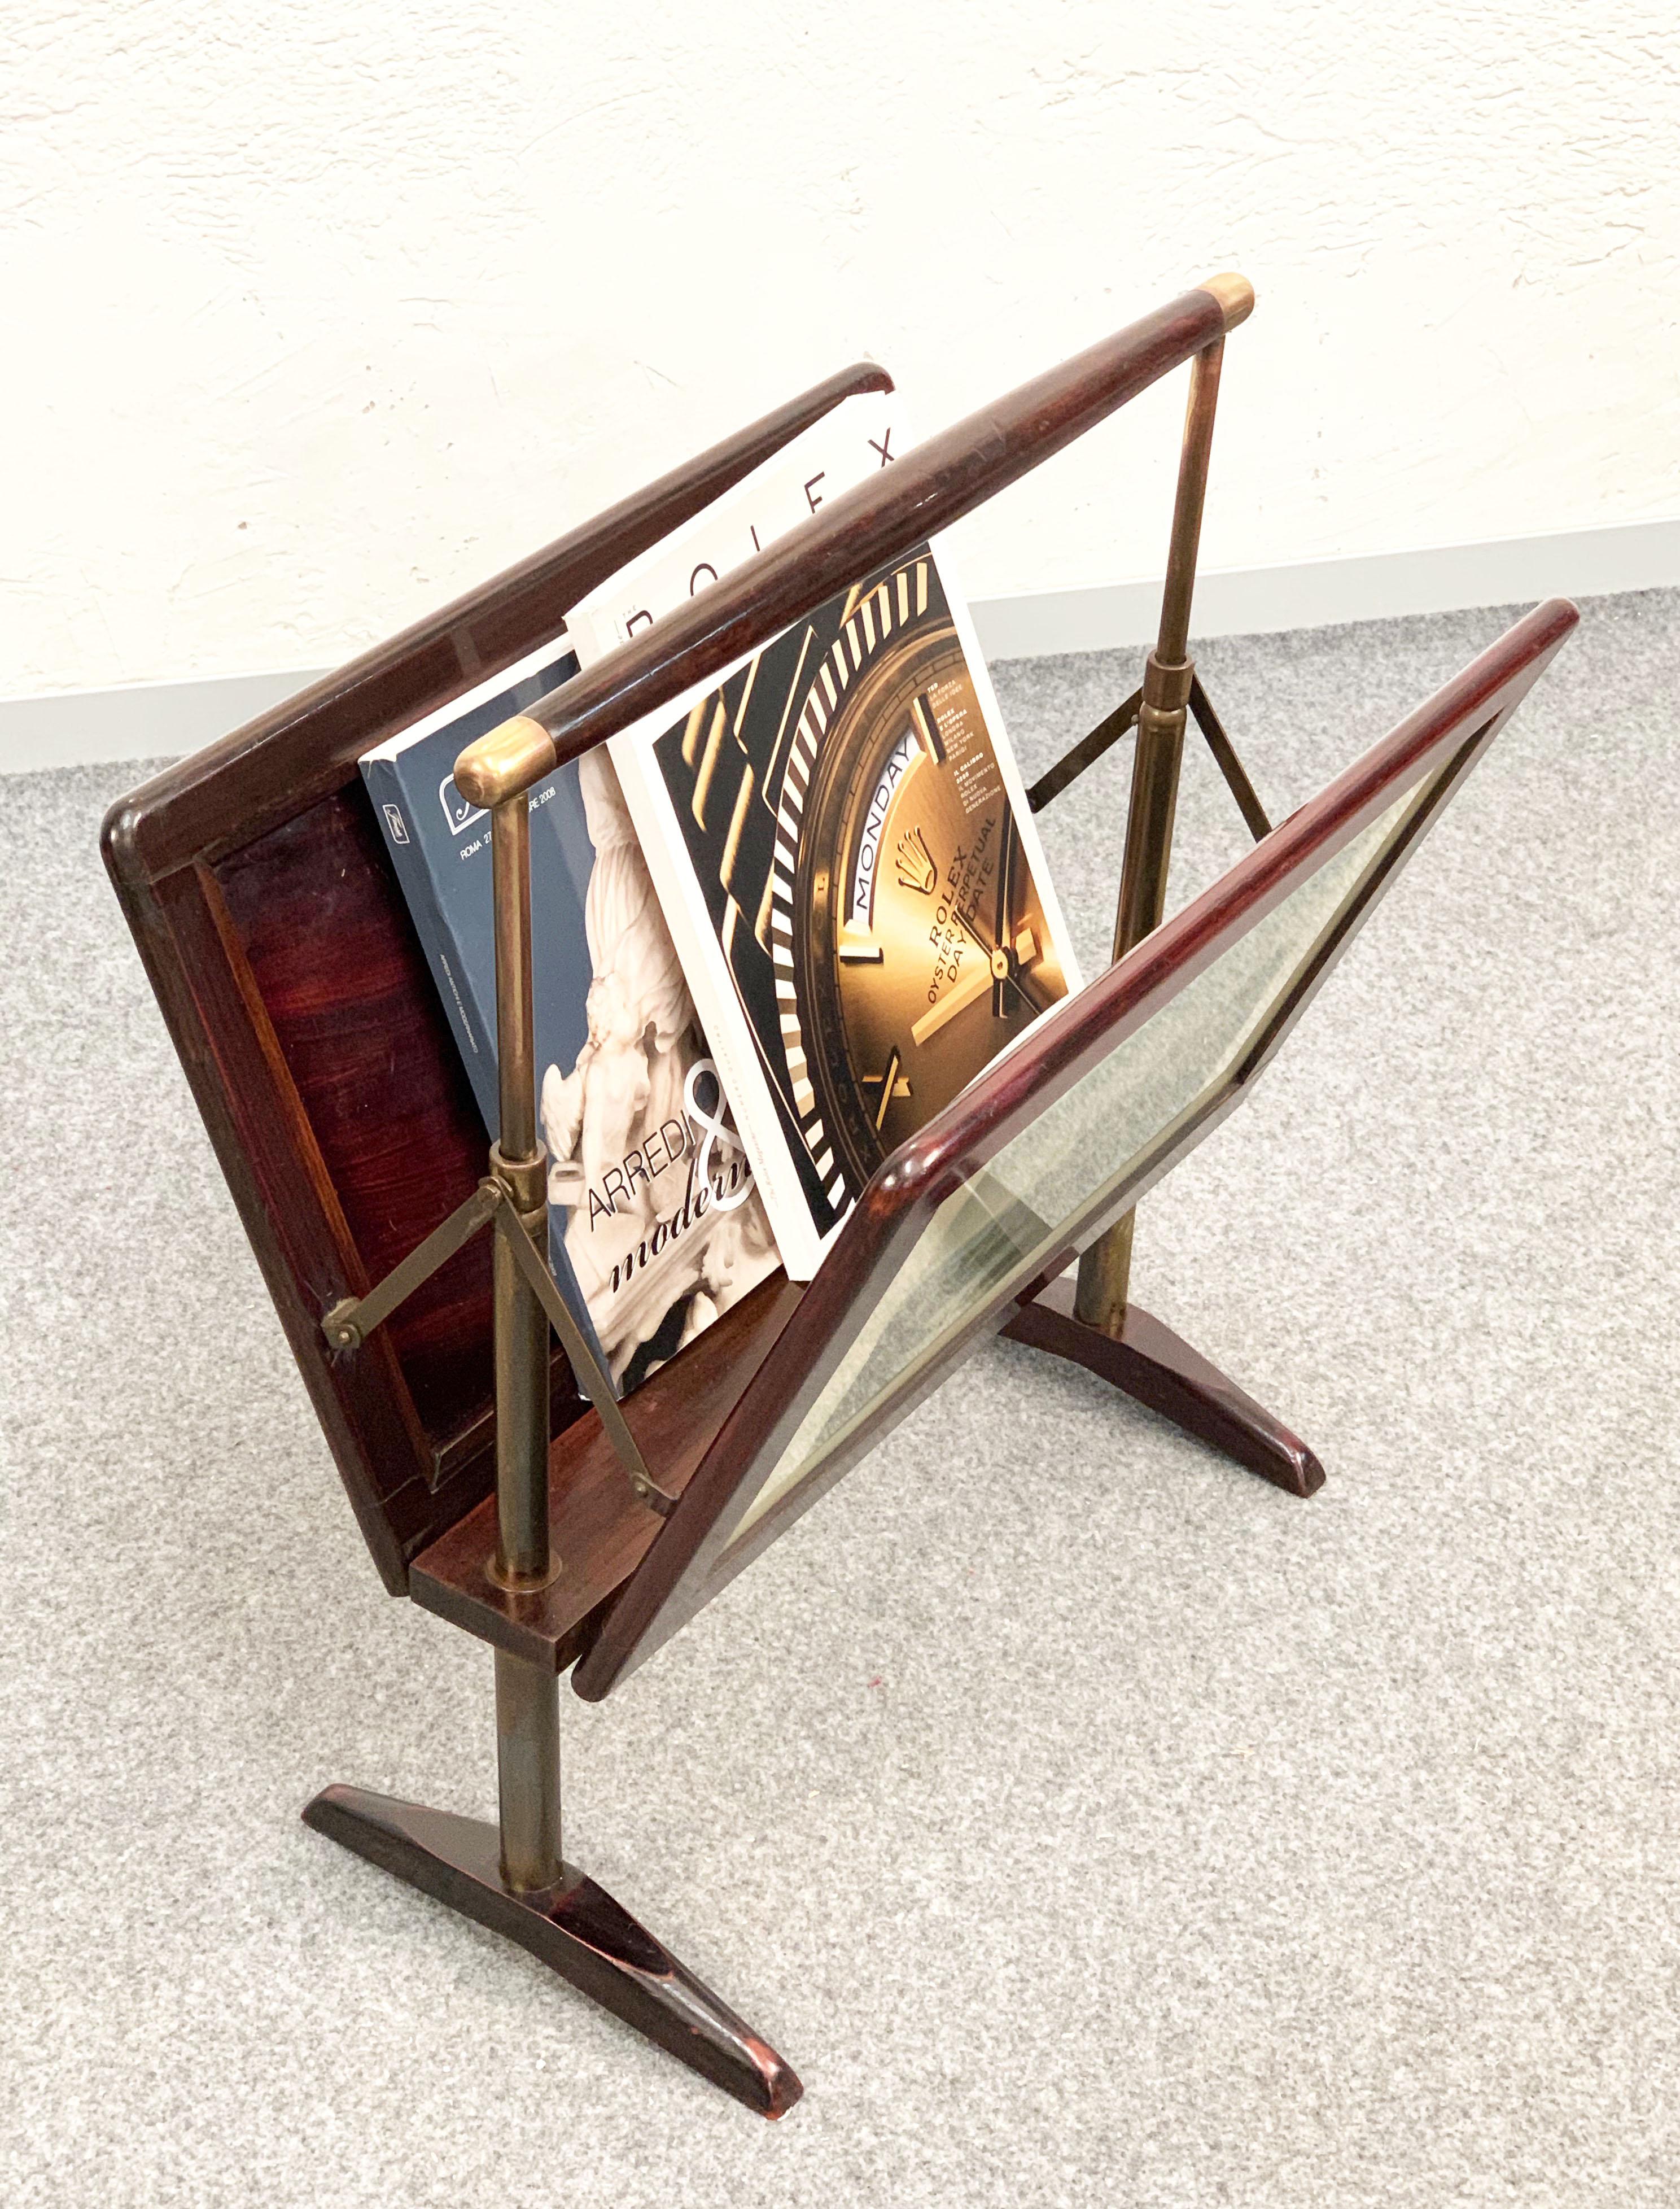 Midcentury Wood and Brass Italian Magazine Rack in Ico Parisi Style, 1950s For Sale 8